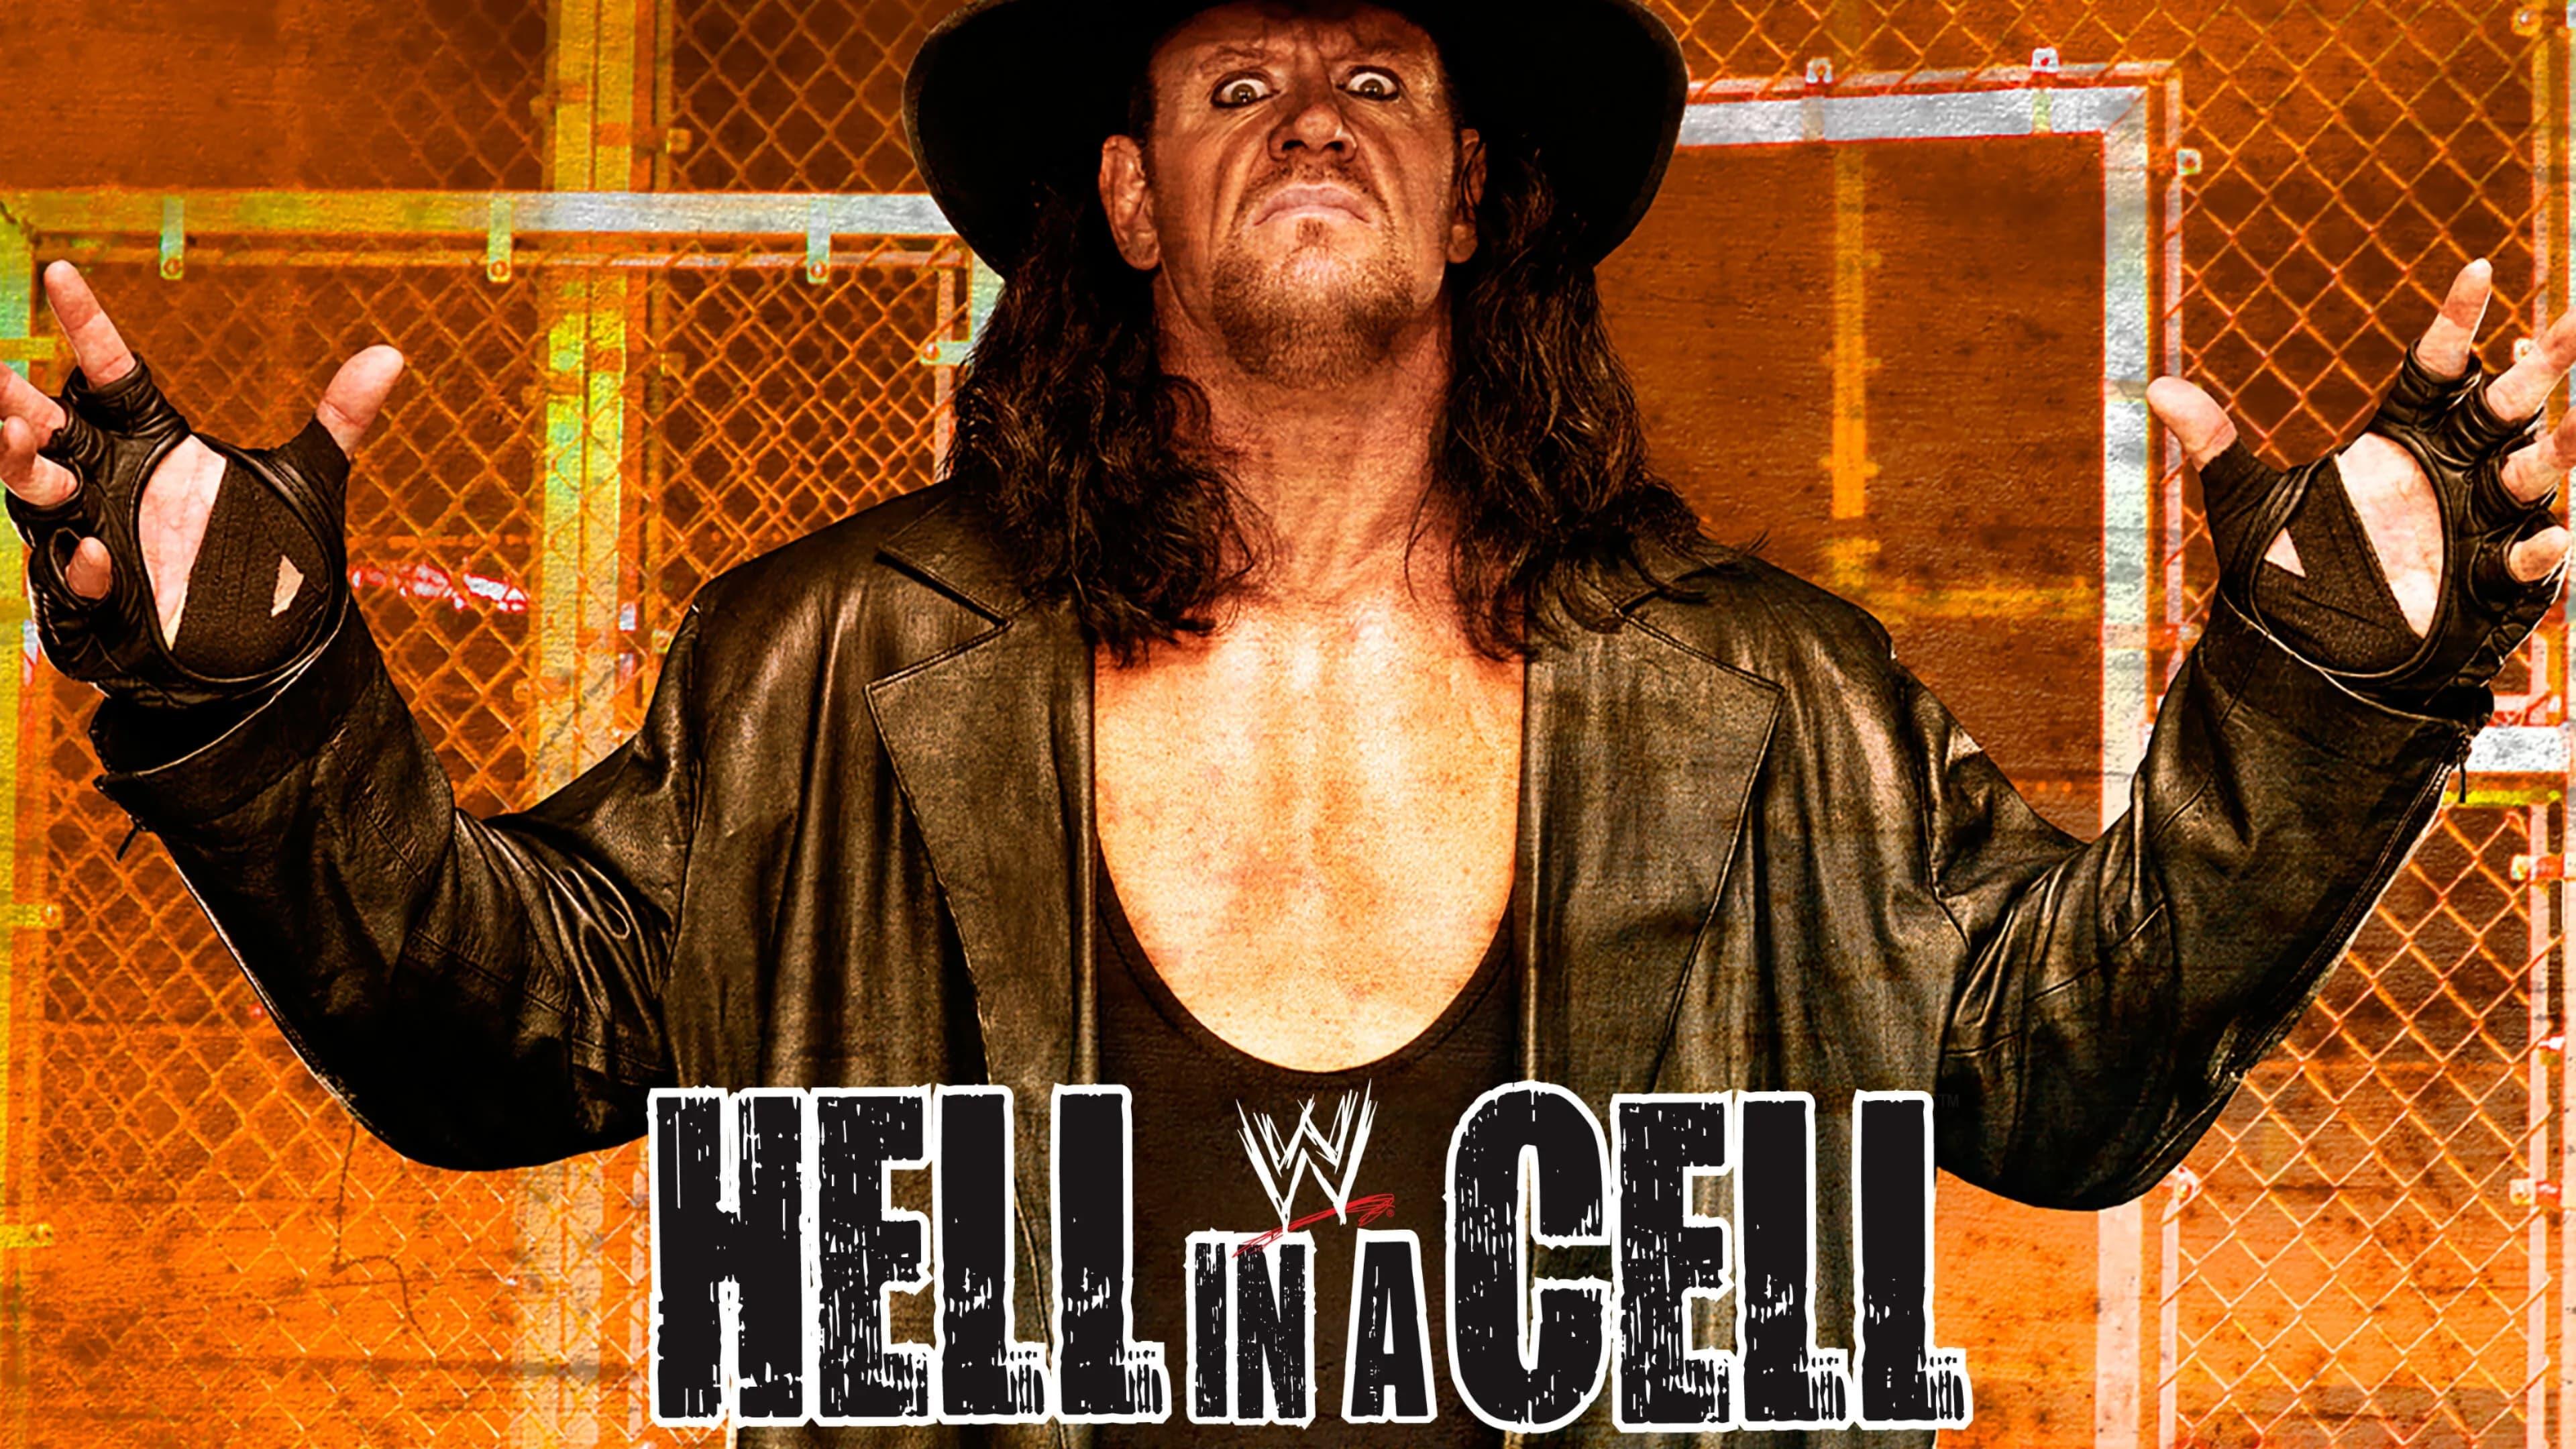 WWE Hell in a Cell 2009 backdrop